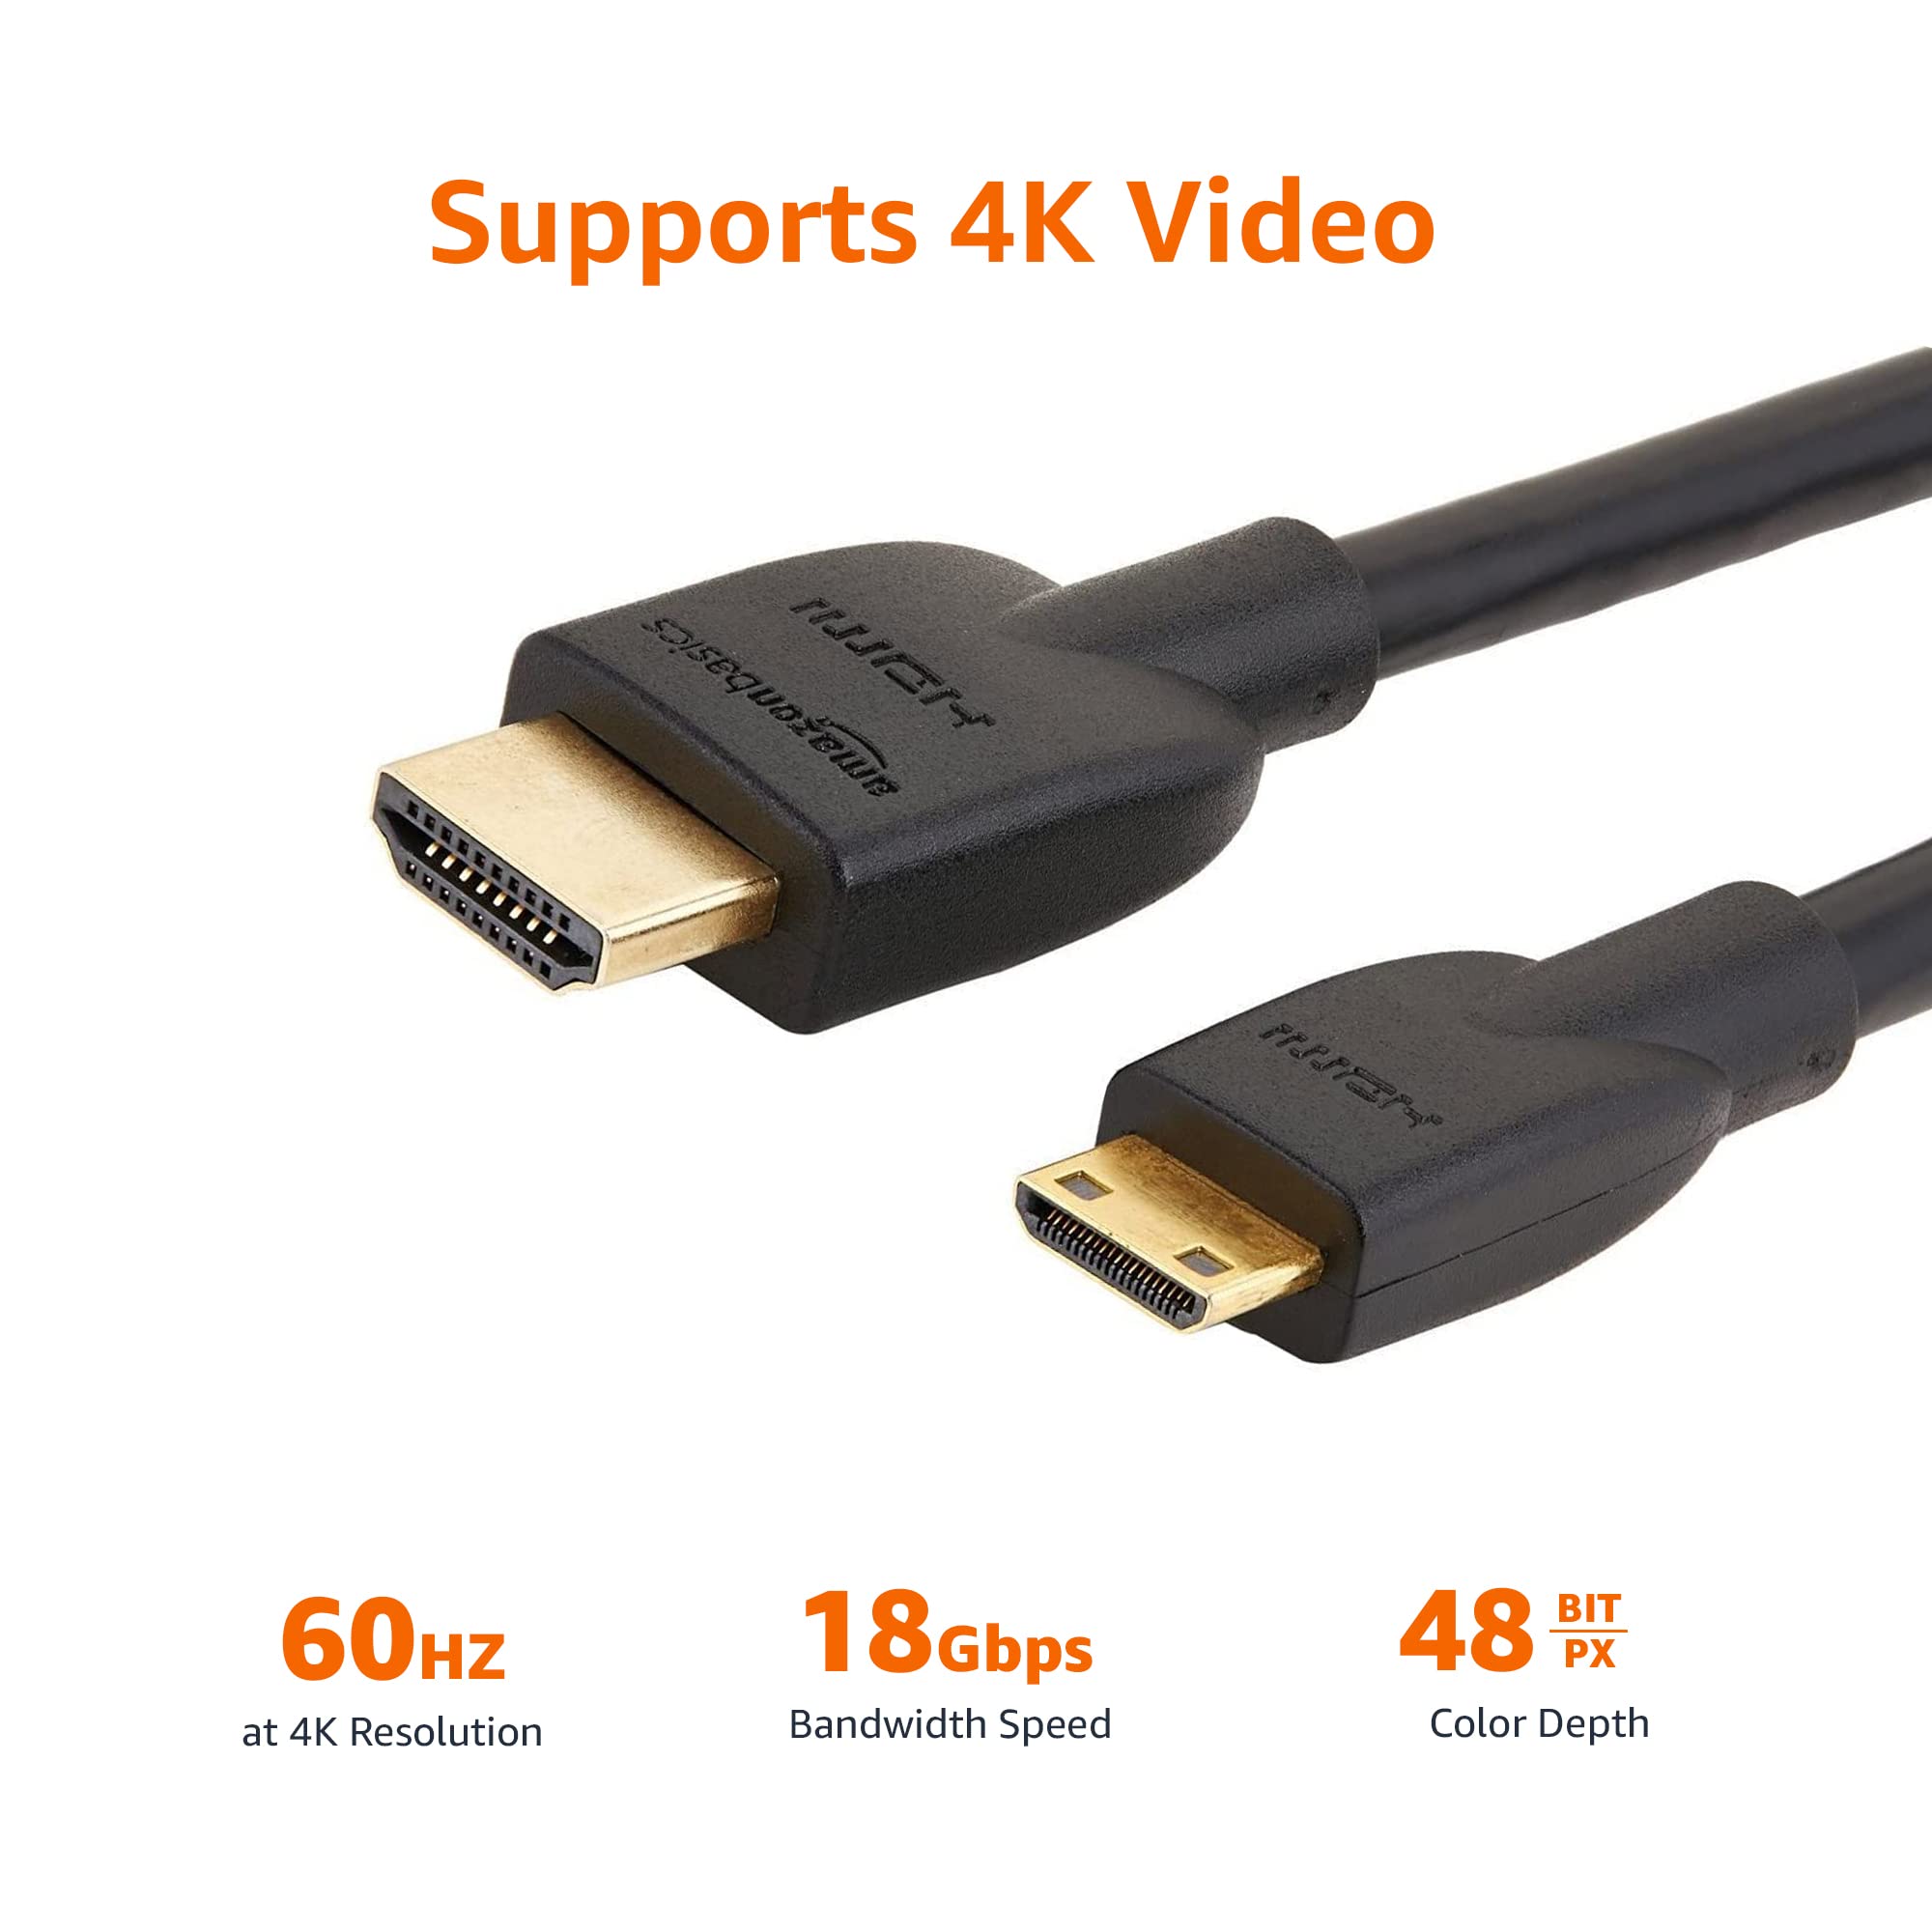 Amazon Basics Mini HDMI to HDMI Adapter Cable, 18Gbps High-Speed, 4K@60Hz, 2160p, 48-Bit Color, Ethernet Ready, 6 Foot, Black